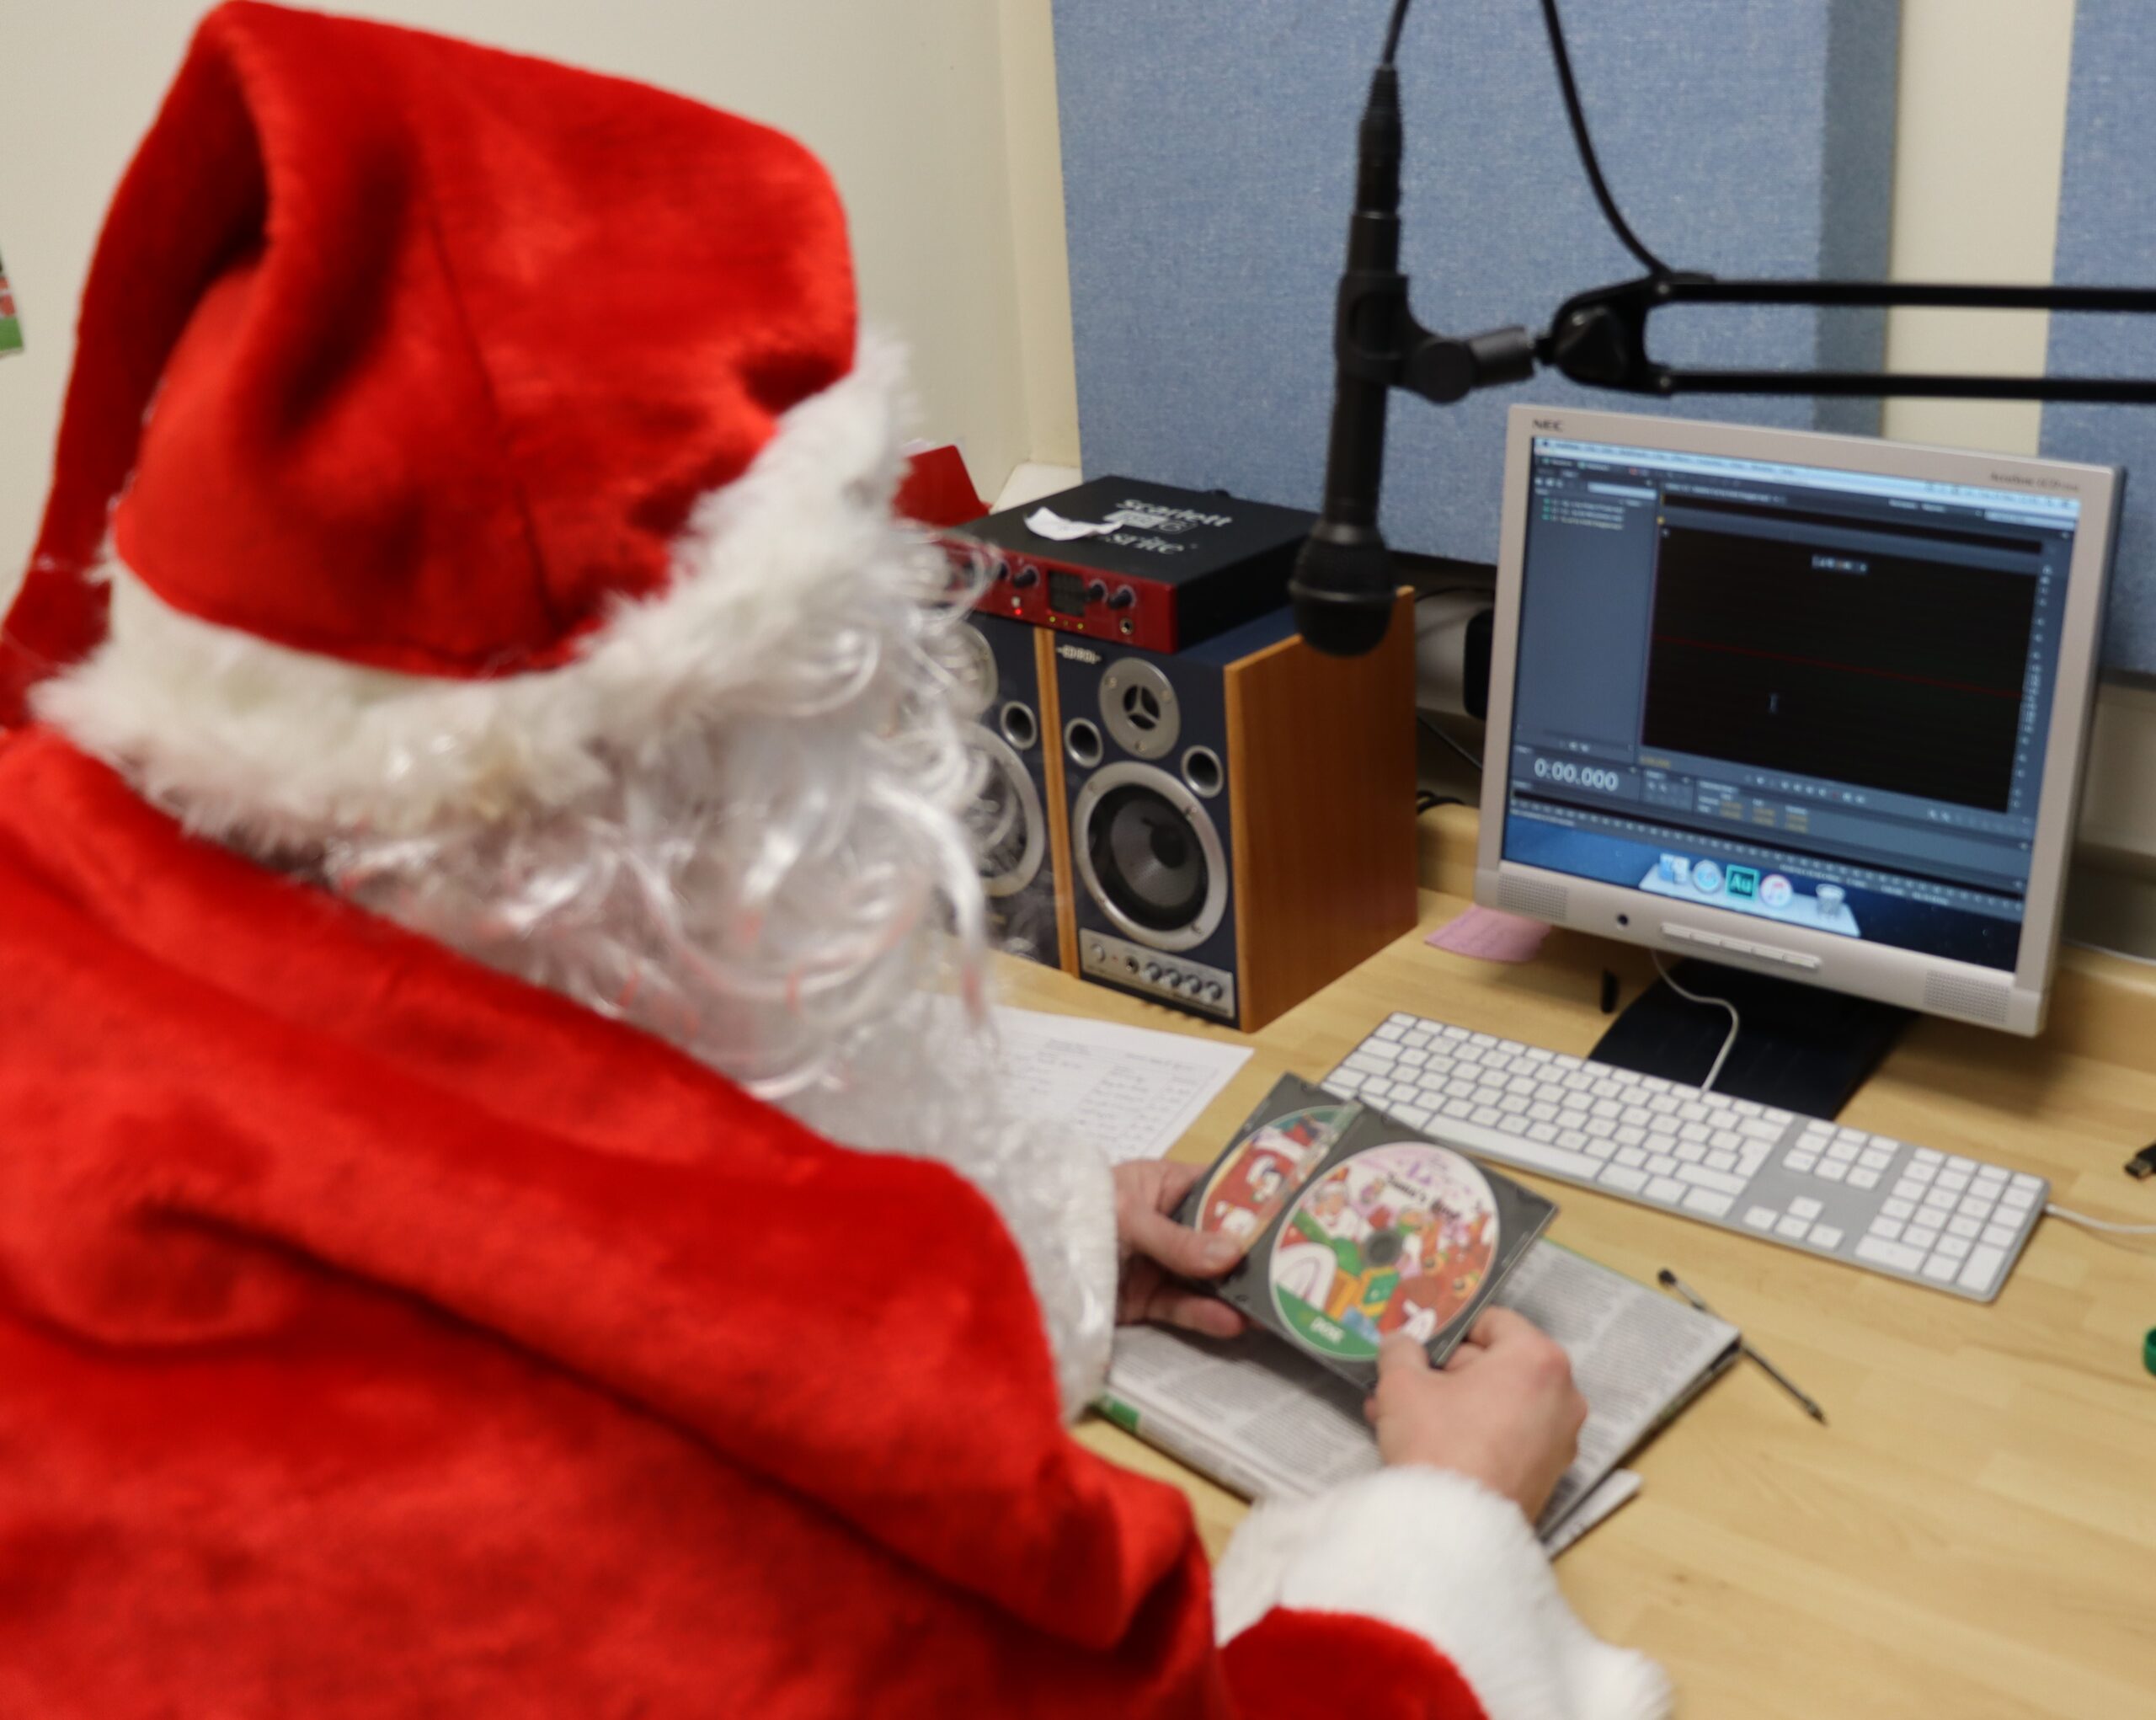 A picture of Santa sitting at a desk in front of a microphone and computer which has recording software on it. He is dressed in his red and white suit and is holding two audio CDs with letters for children who are blind or vision impaired.